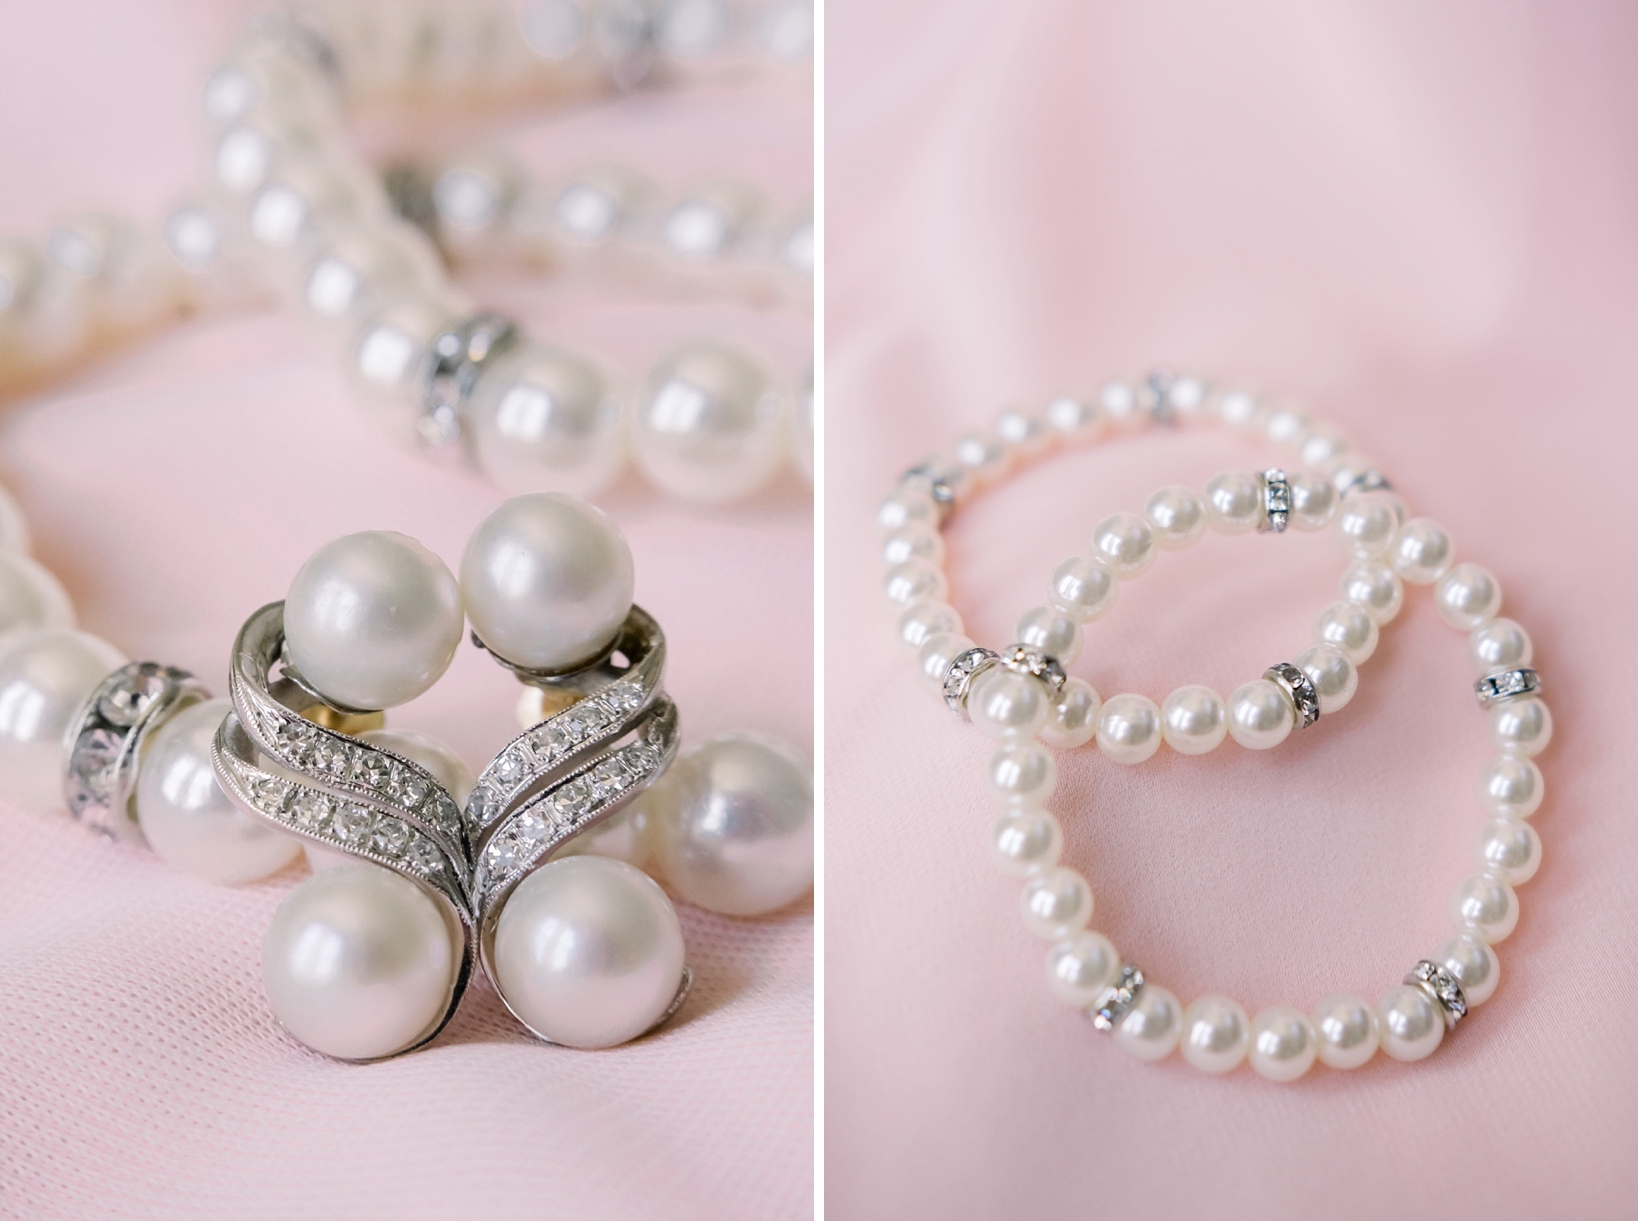 The Bridal jewellery of pearls and diamonds